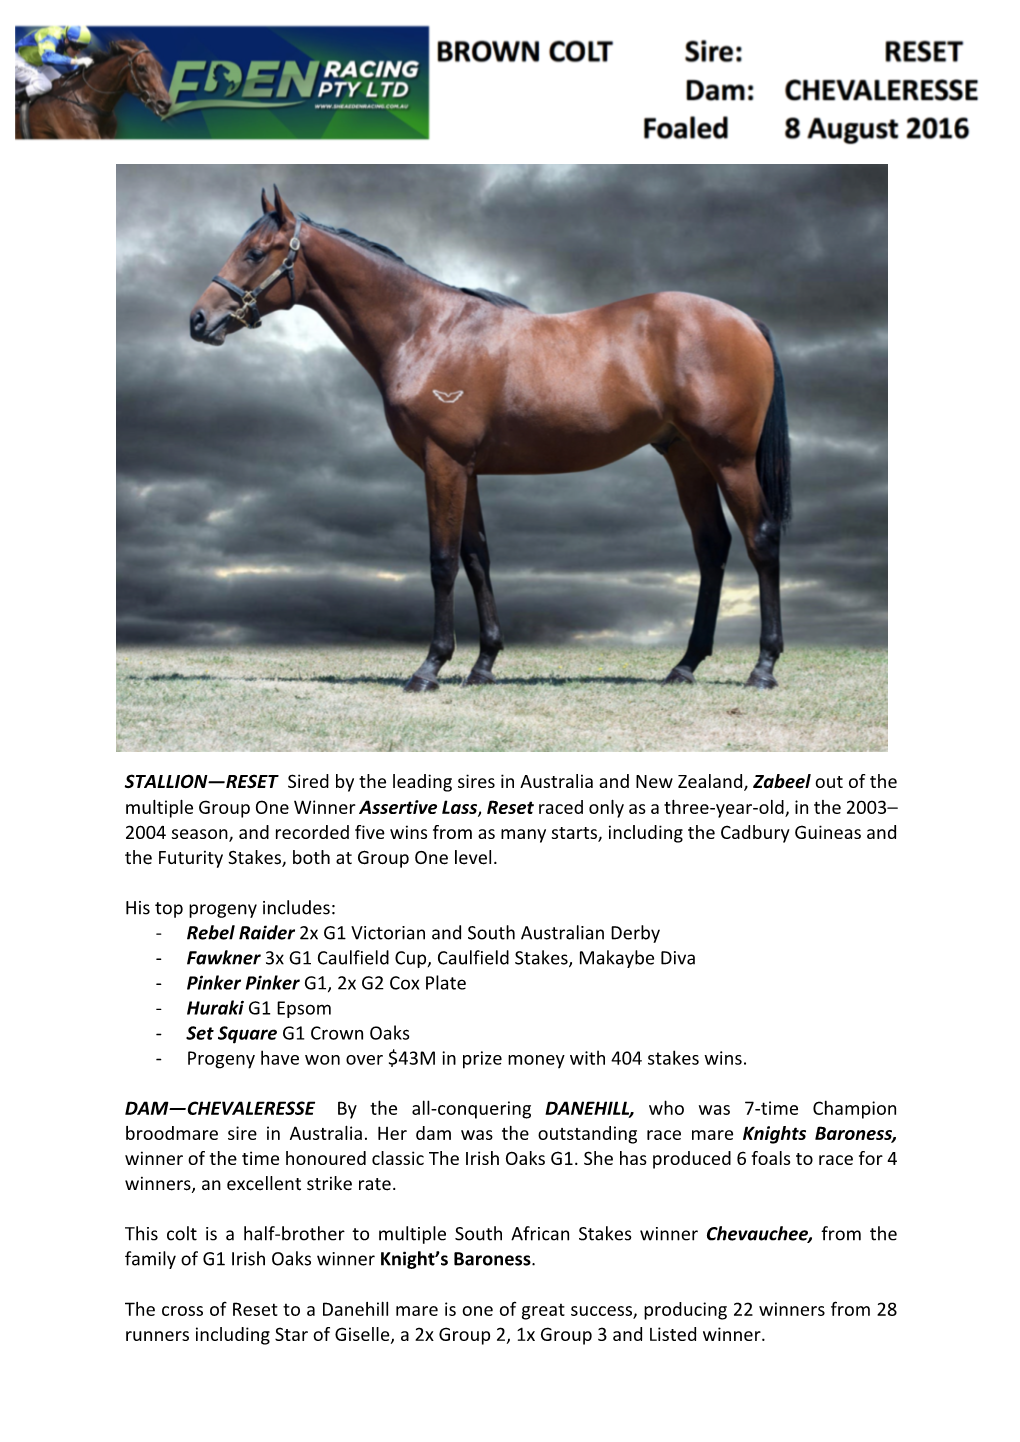 STALLION—RESET Sired by the Leading Sires in Australia and New